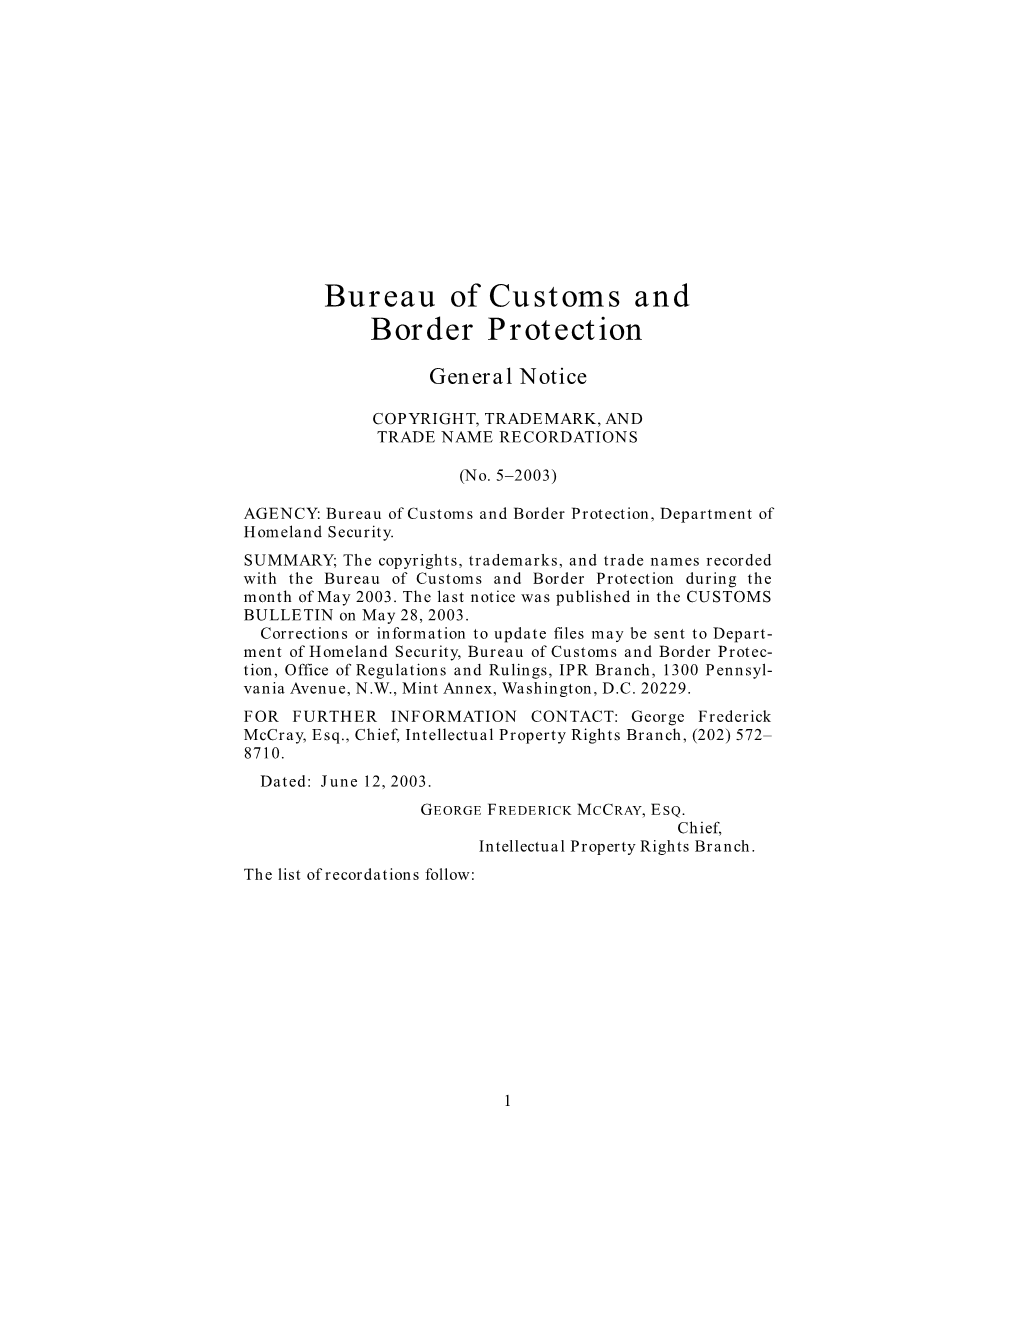 Bureau of Customs and Border Protection General Notice